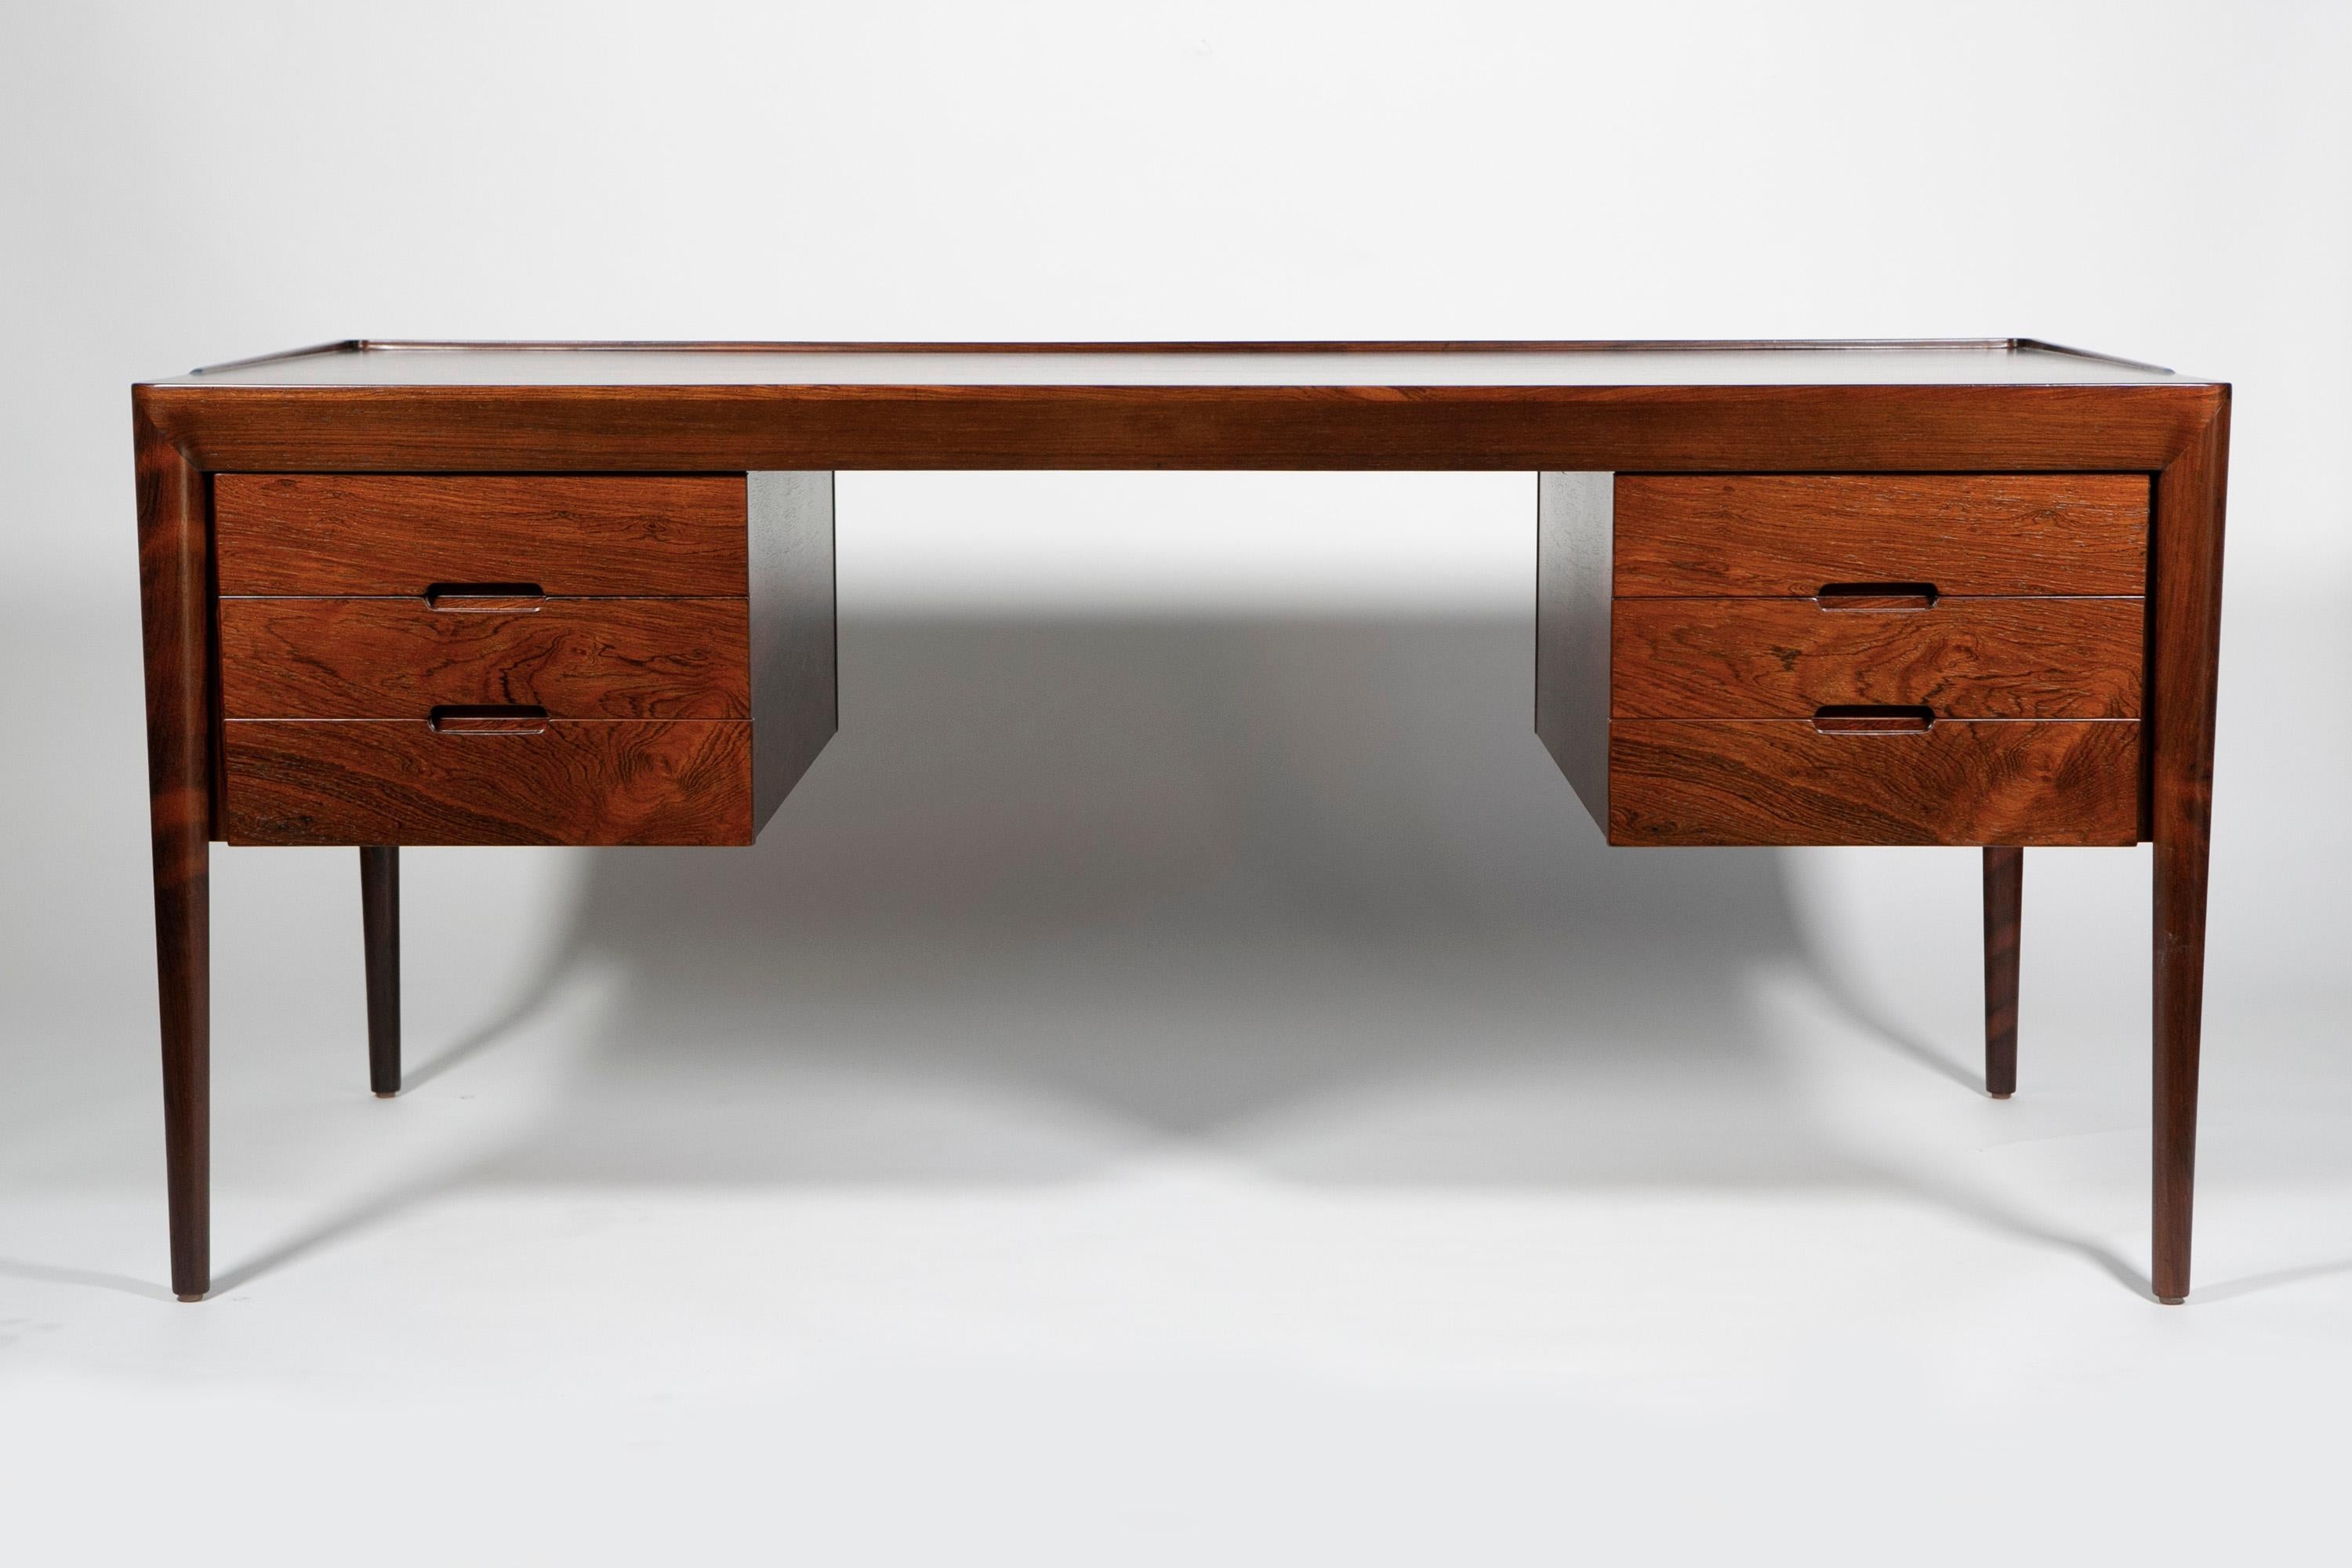 Rosewood Writing Desk, Erik Riisager Hansen, Haslev Mobelsnedkeri, Denmark, 1950s

This rare Rosewood writing desk by Erik Riisager Hansen for Haslev Mobelsnedkeri has a very elegant and sleek design with nice details. The beautiful thick banding